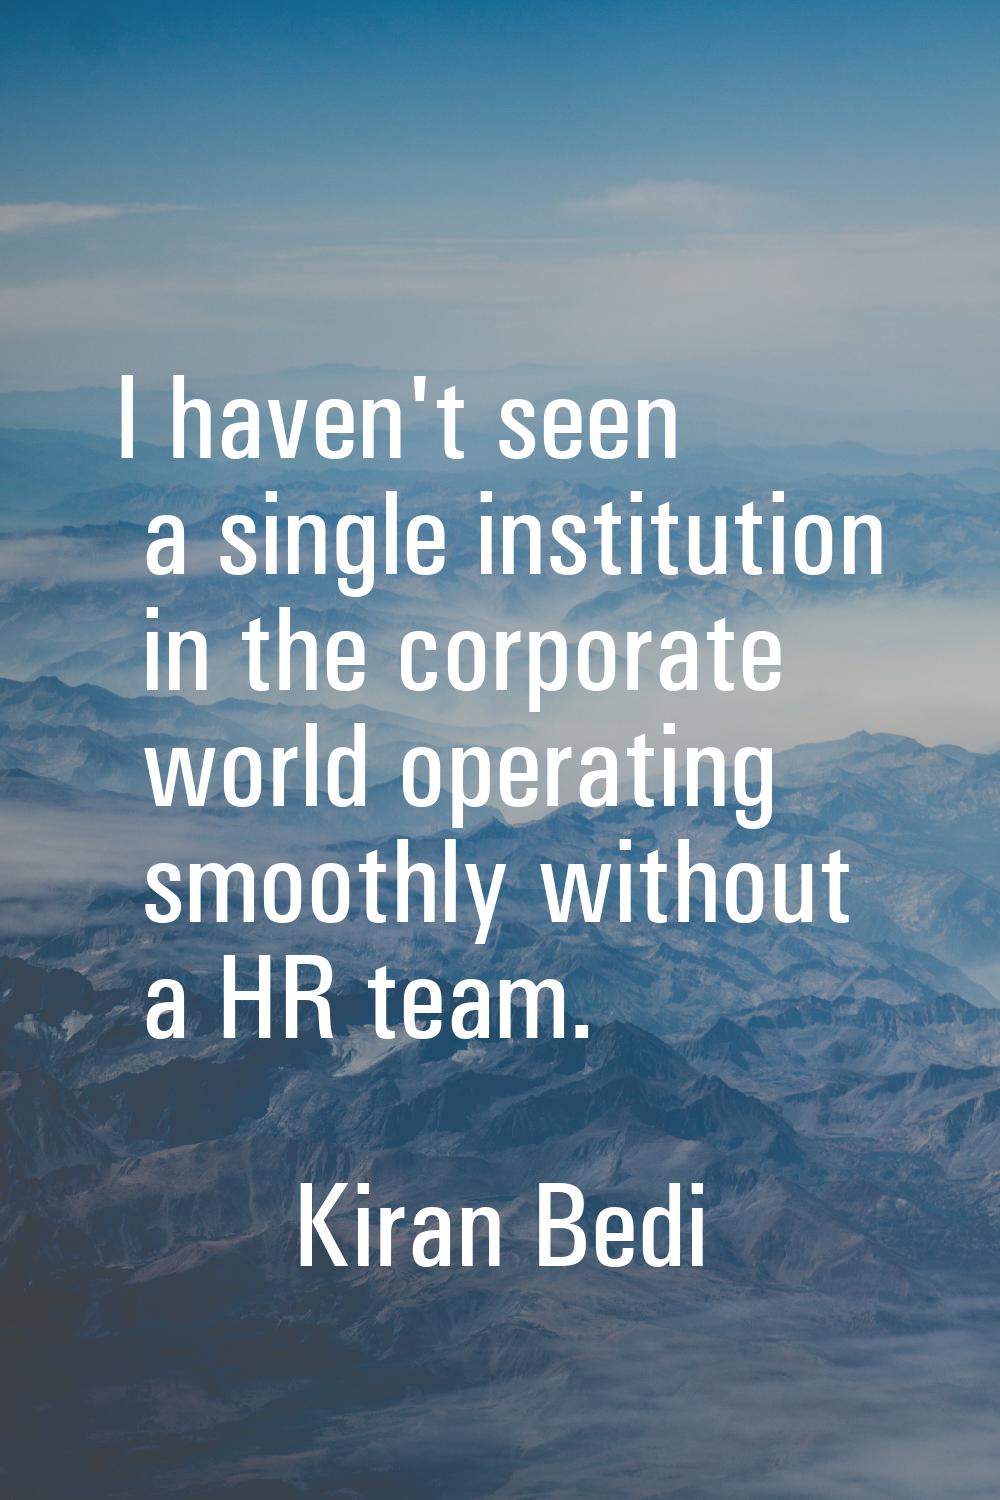 I haven't seen a single institution in the corporate world operating smoothly without a HR team.